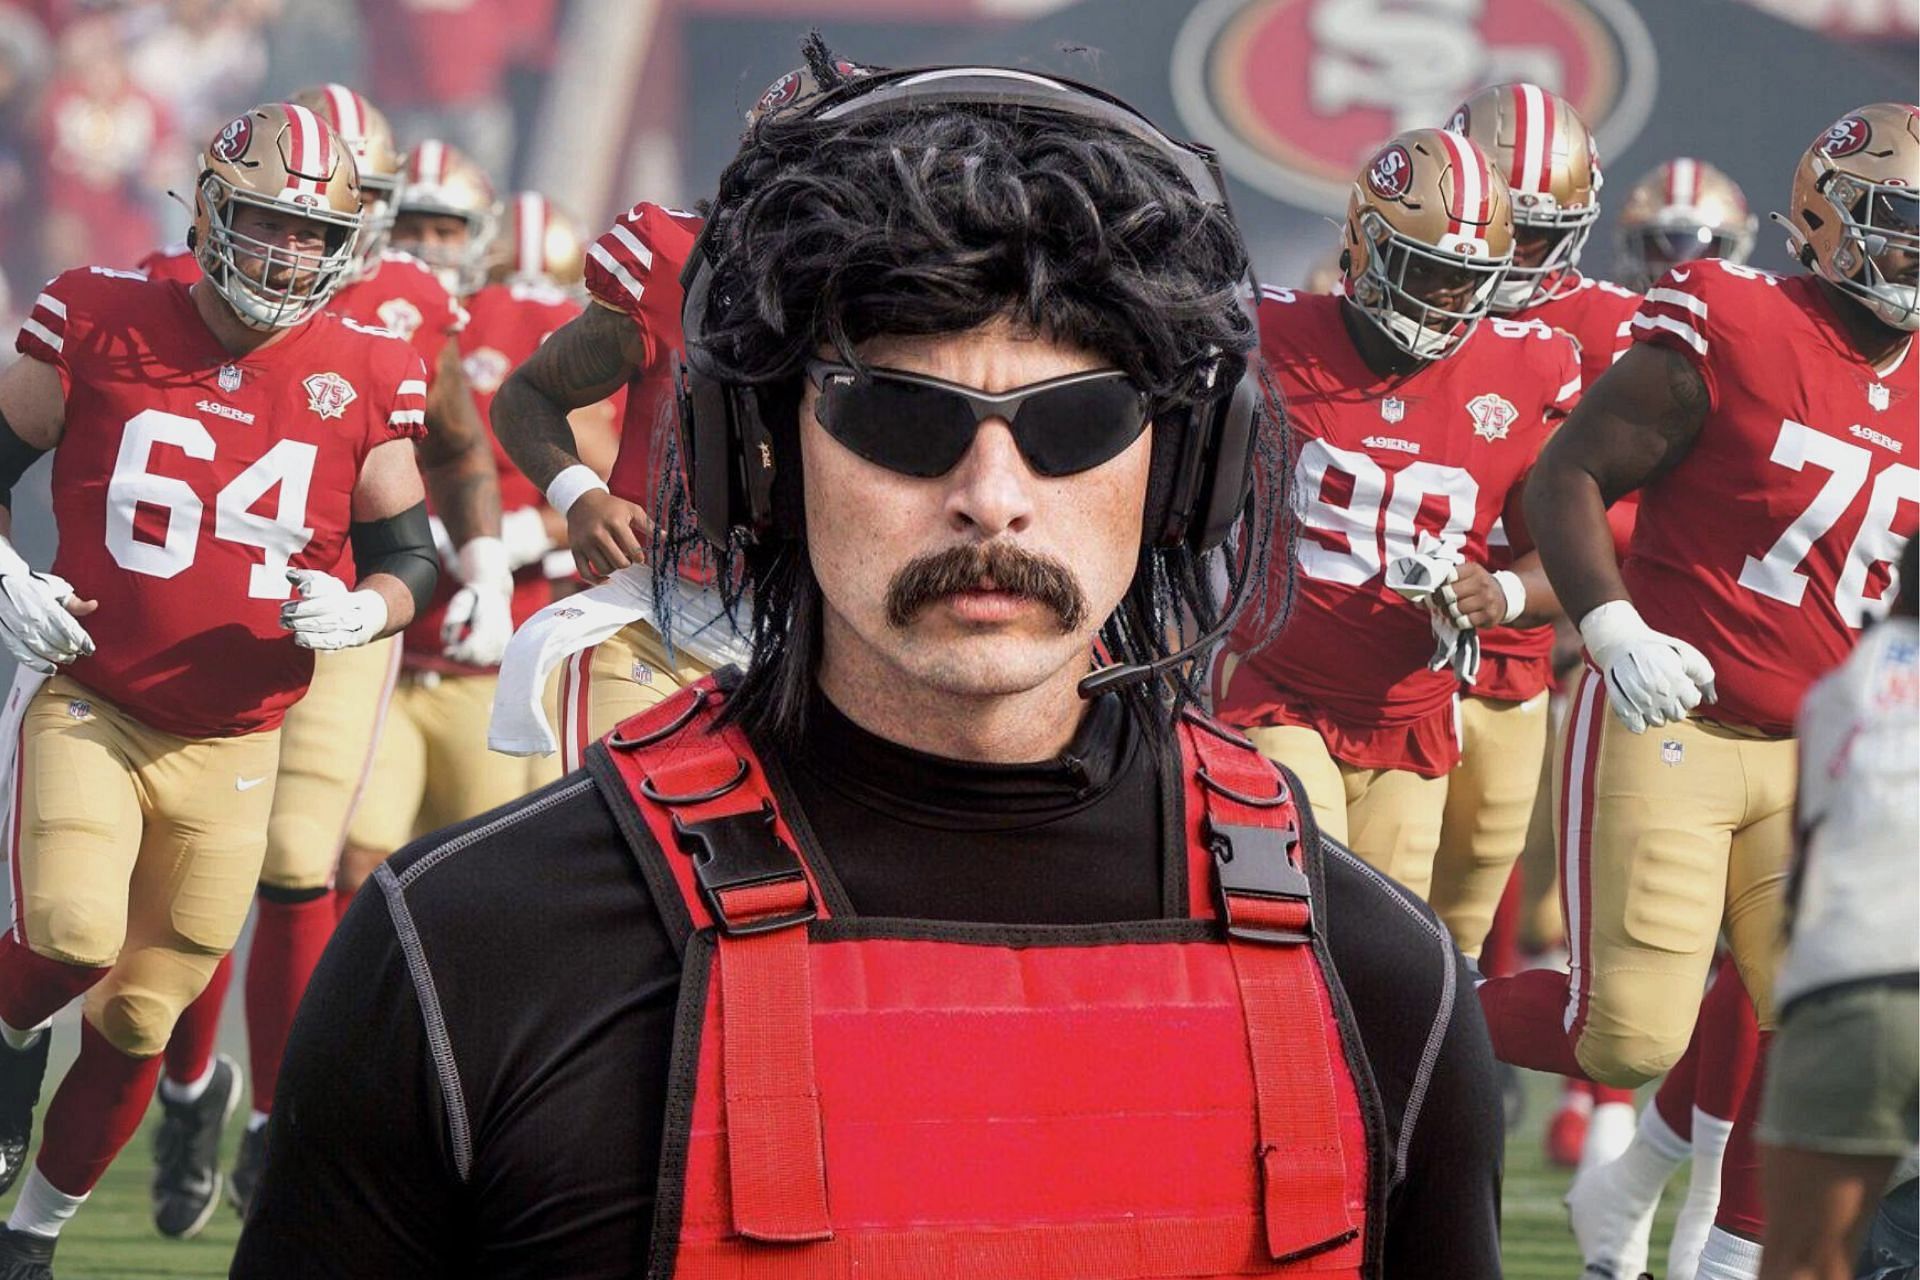 Dr DisRespect appears on national television (Image via Sportskeeda)